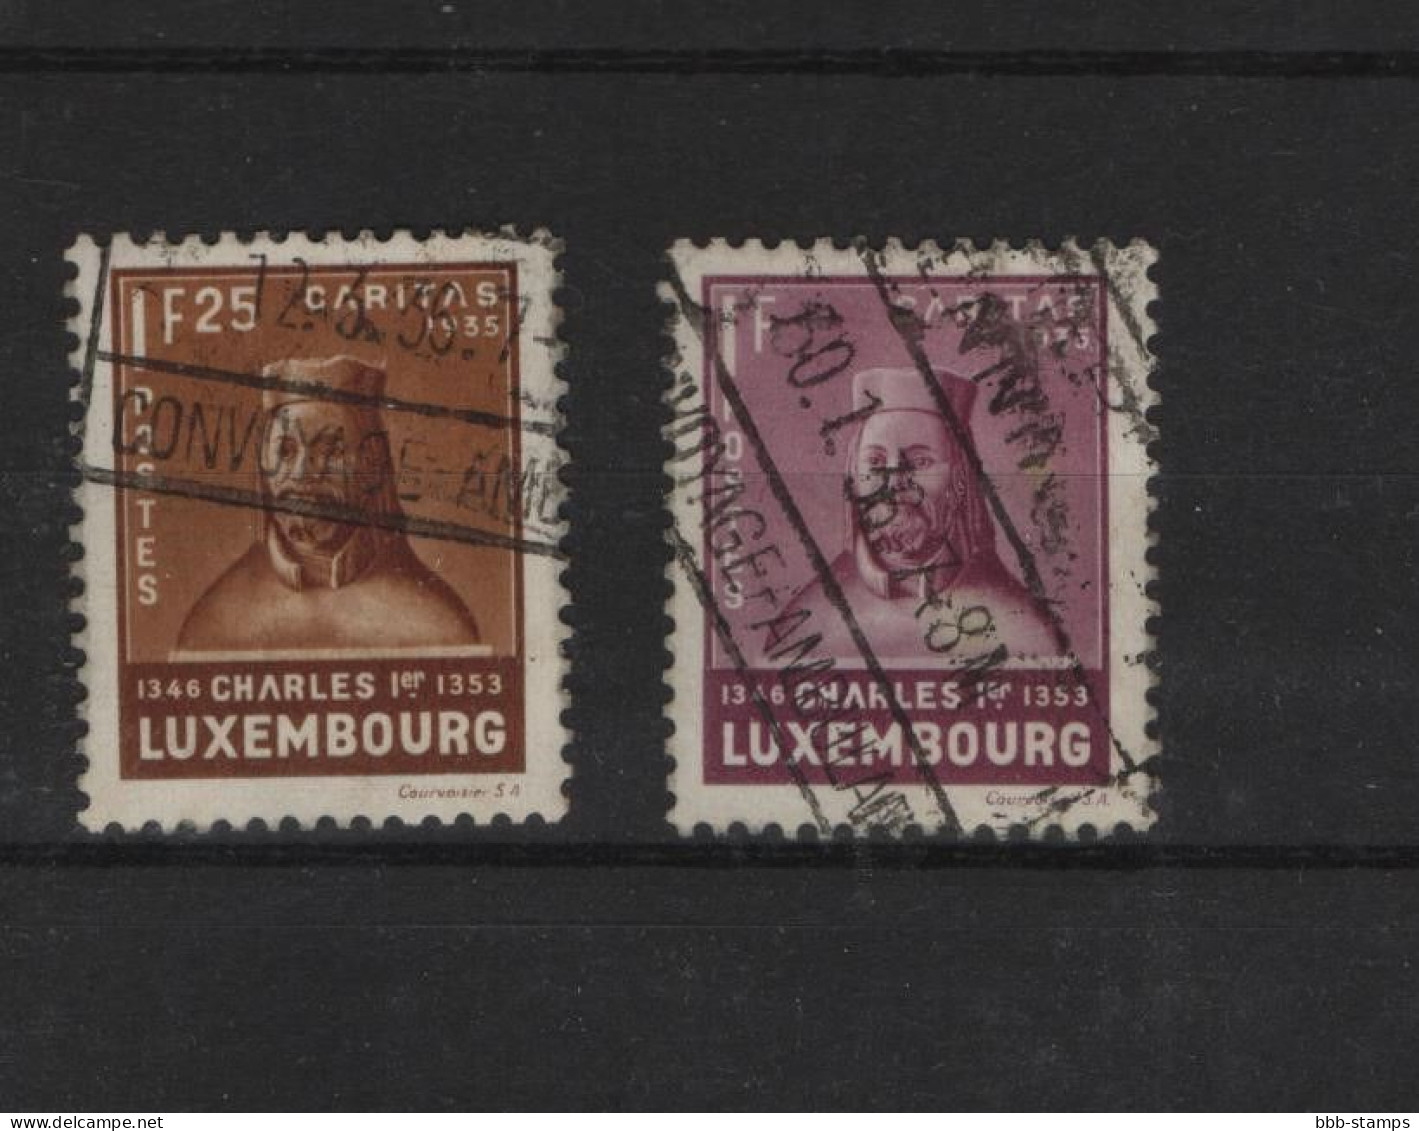 Luxemburg Michel Cat.No.  Used 287/288 - Used Stamps